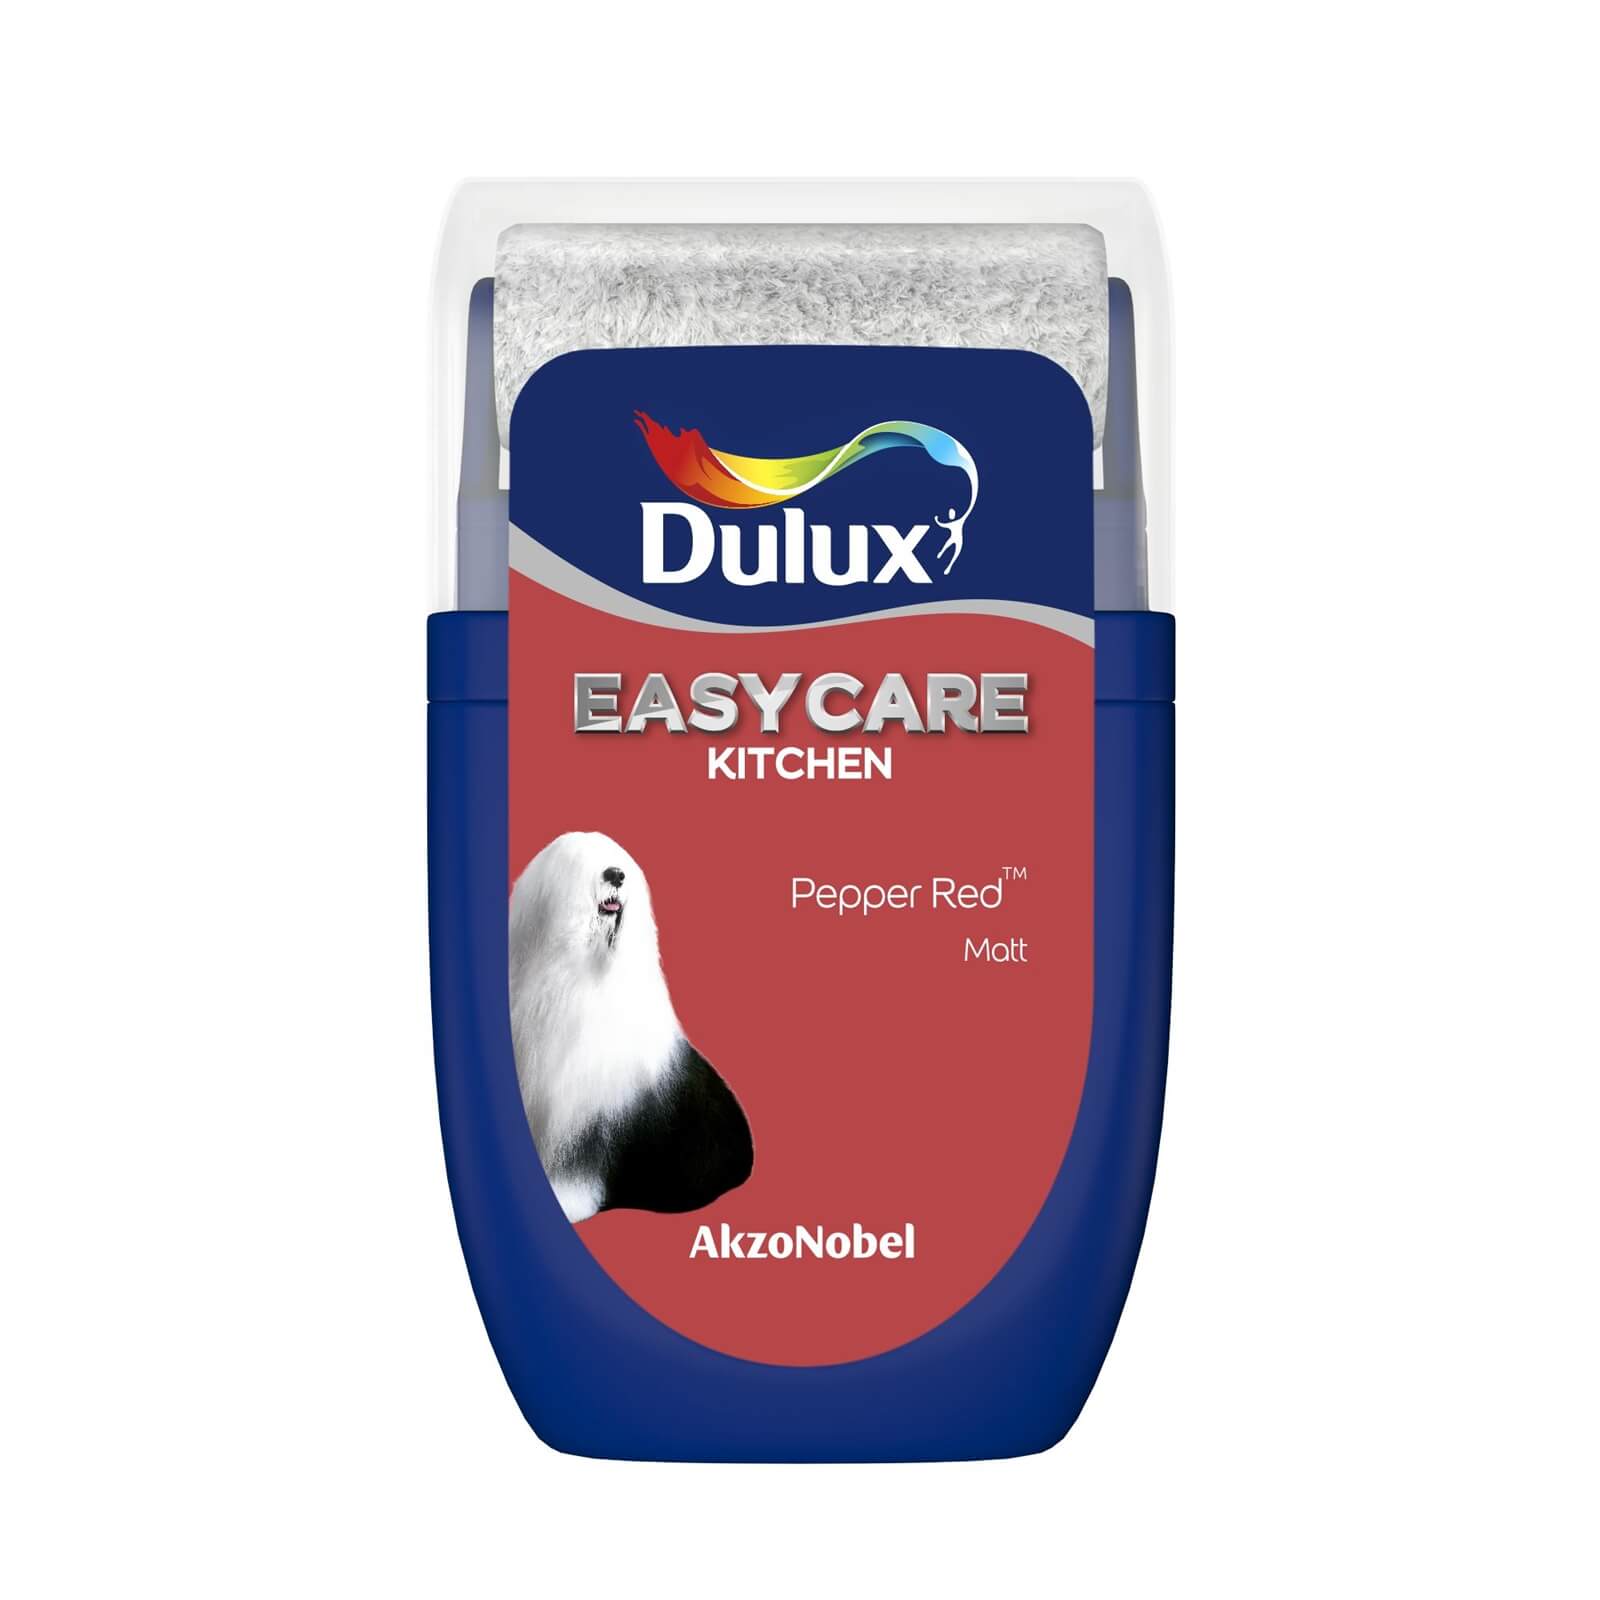 Dulux Easycare Kitchen Pepper Red Tester Paint - 30ml